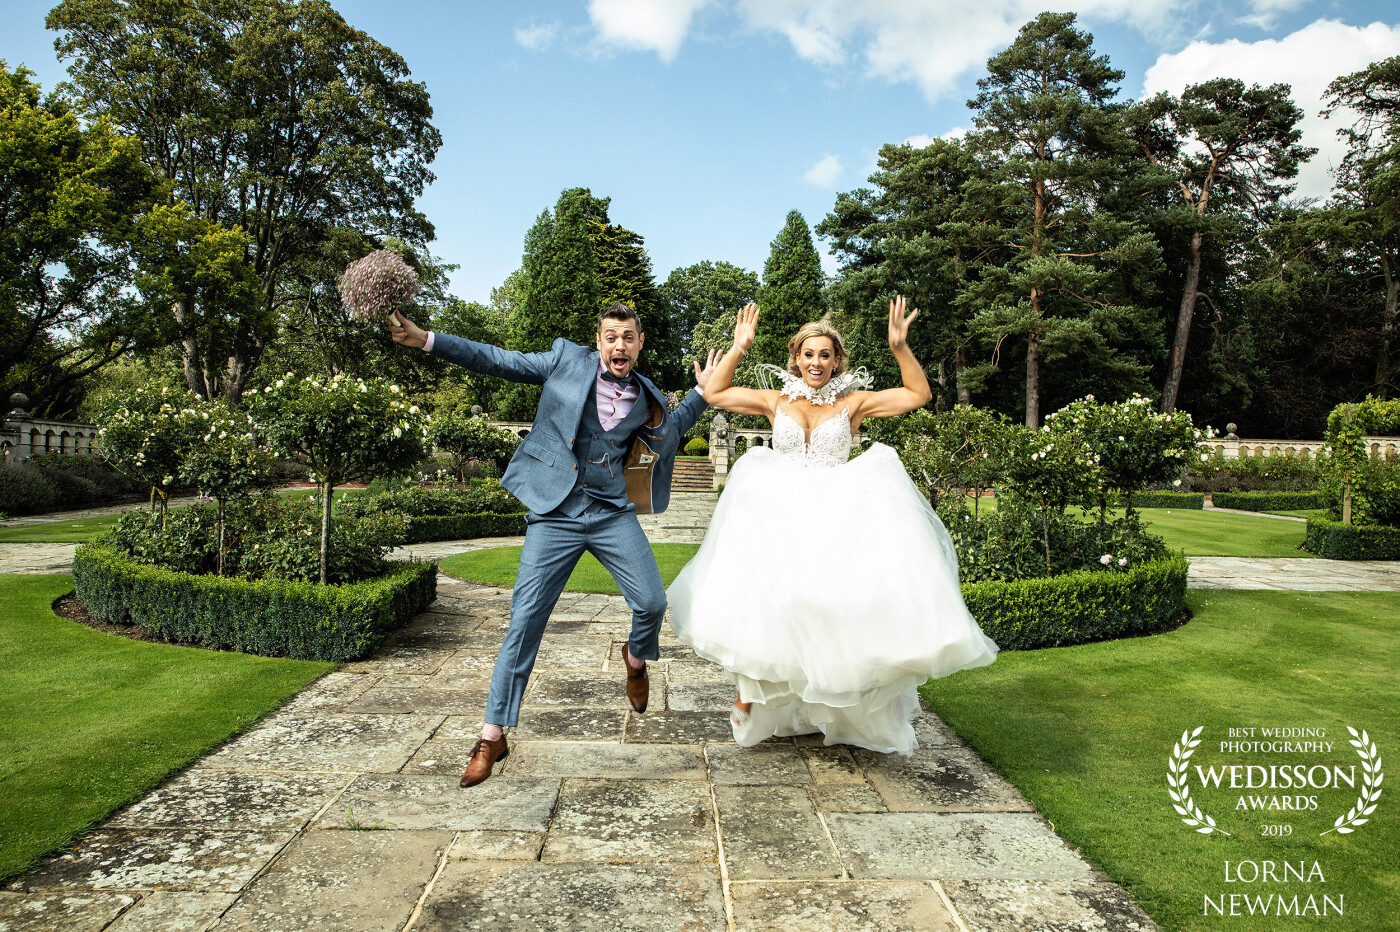 Hayley & Lee Chandler loving every minute of their amazing wedding day at the beautiful Longstowe Hall in Cambridge. We had so much fun and literally could not stop these two from jumping around.